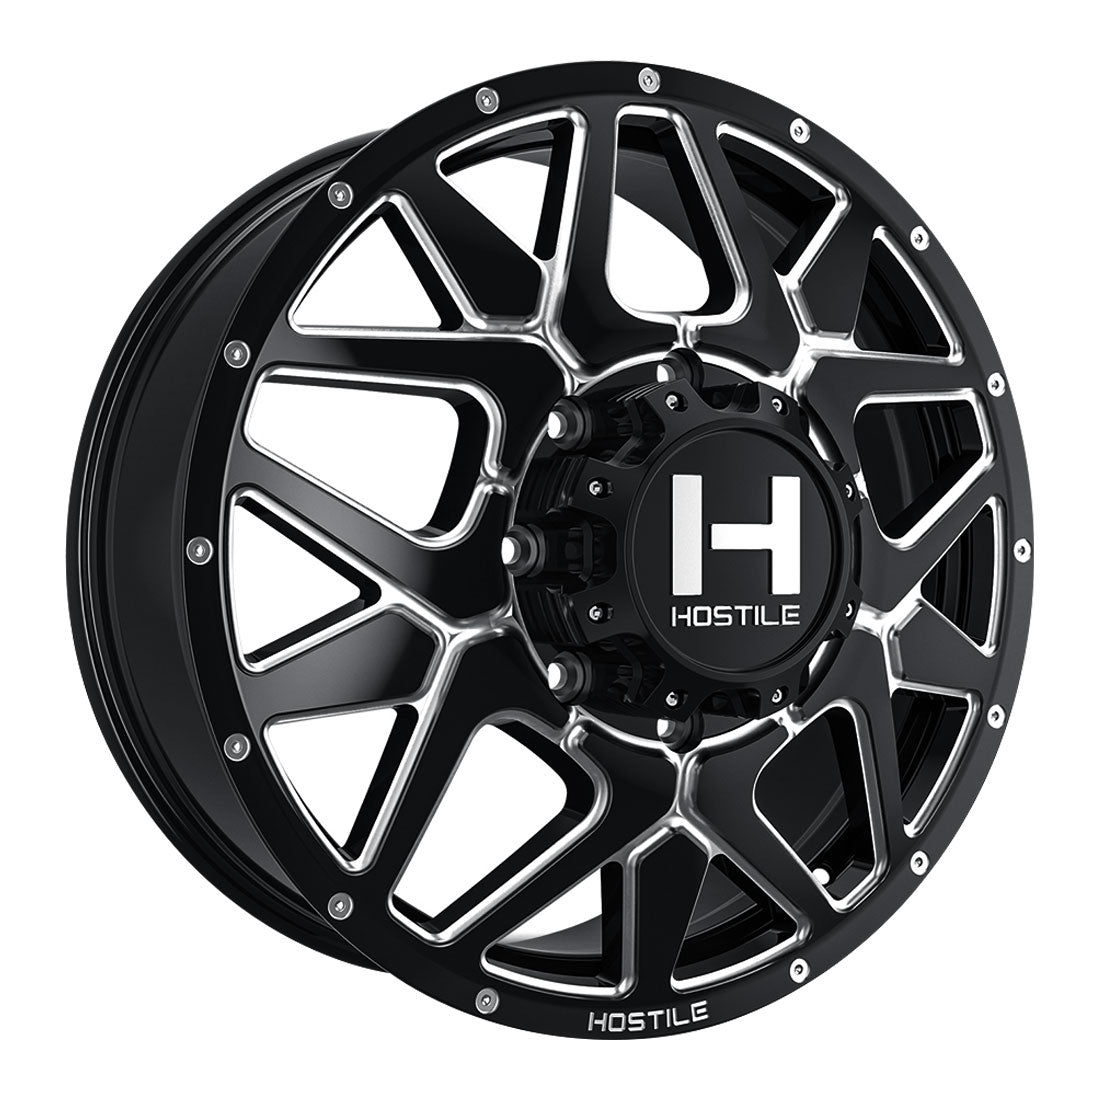 Diablo H402 BladeCut Traditional Front Open Country A/TIII 285/55R22 (34.4 x 11.7)